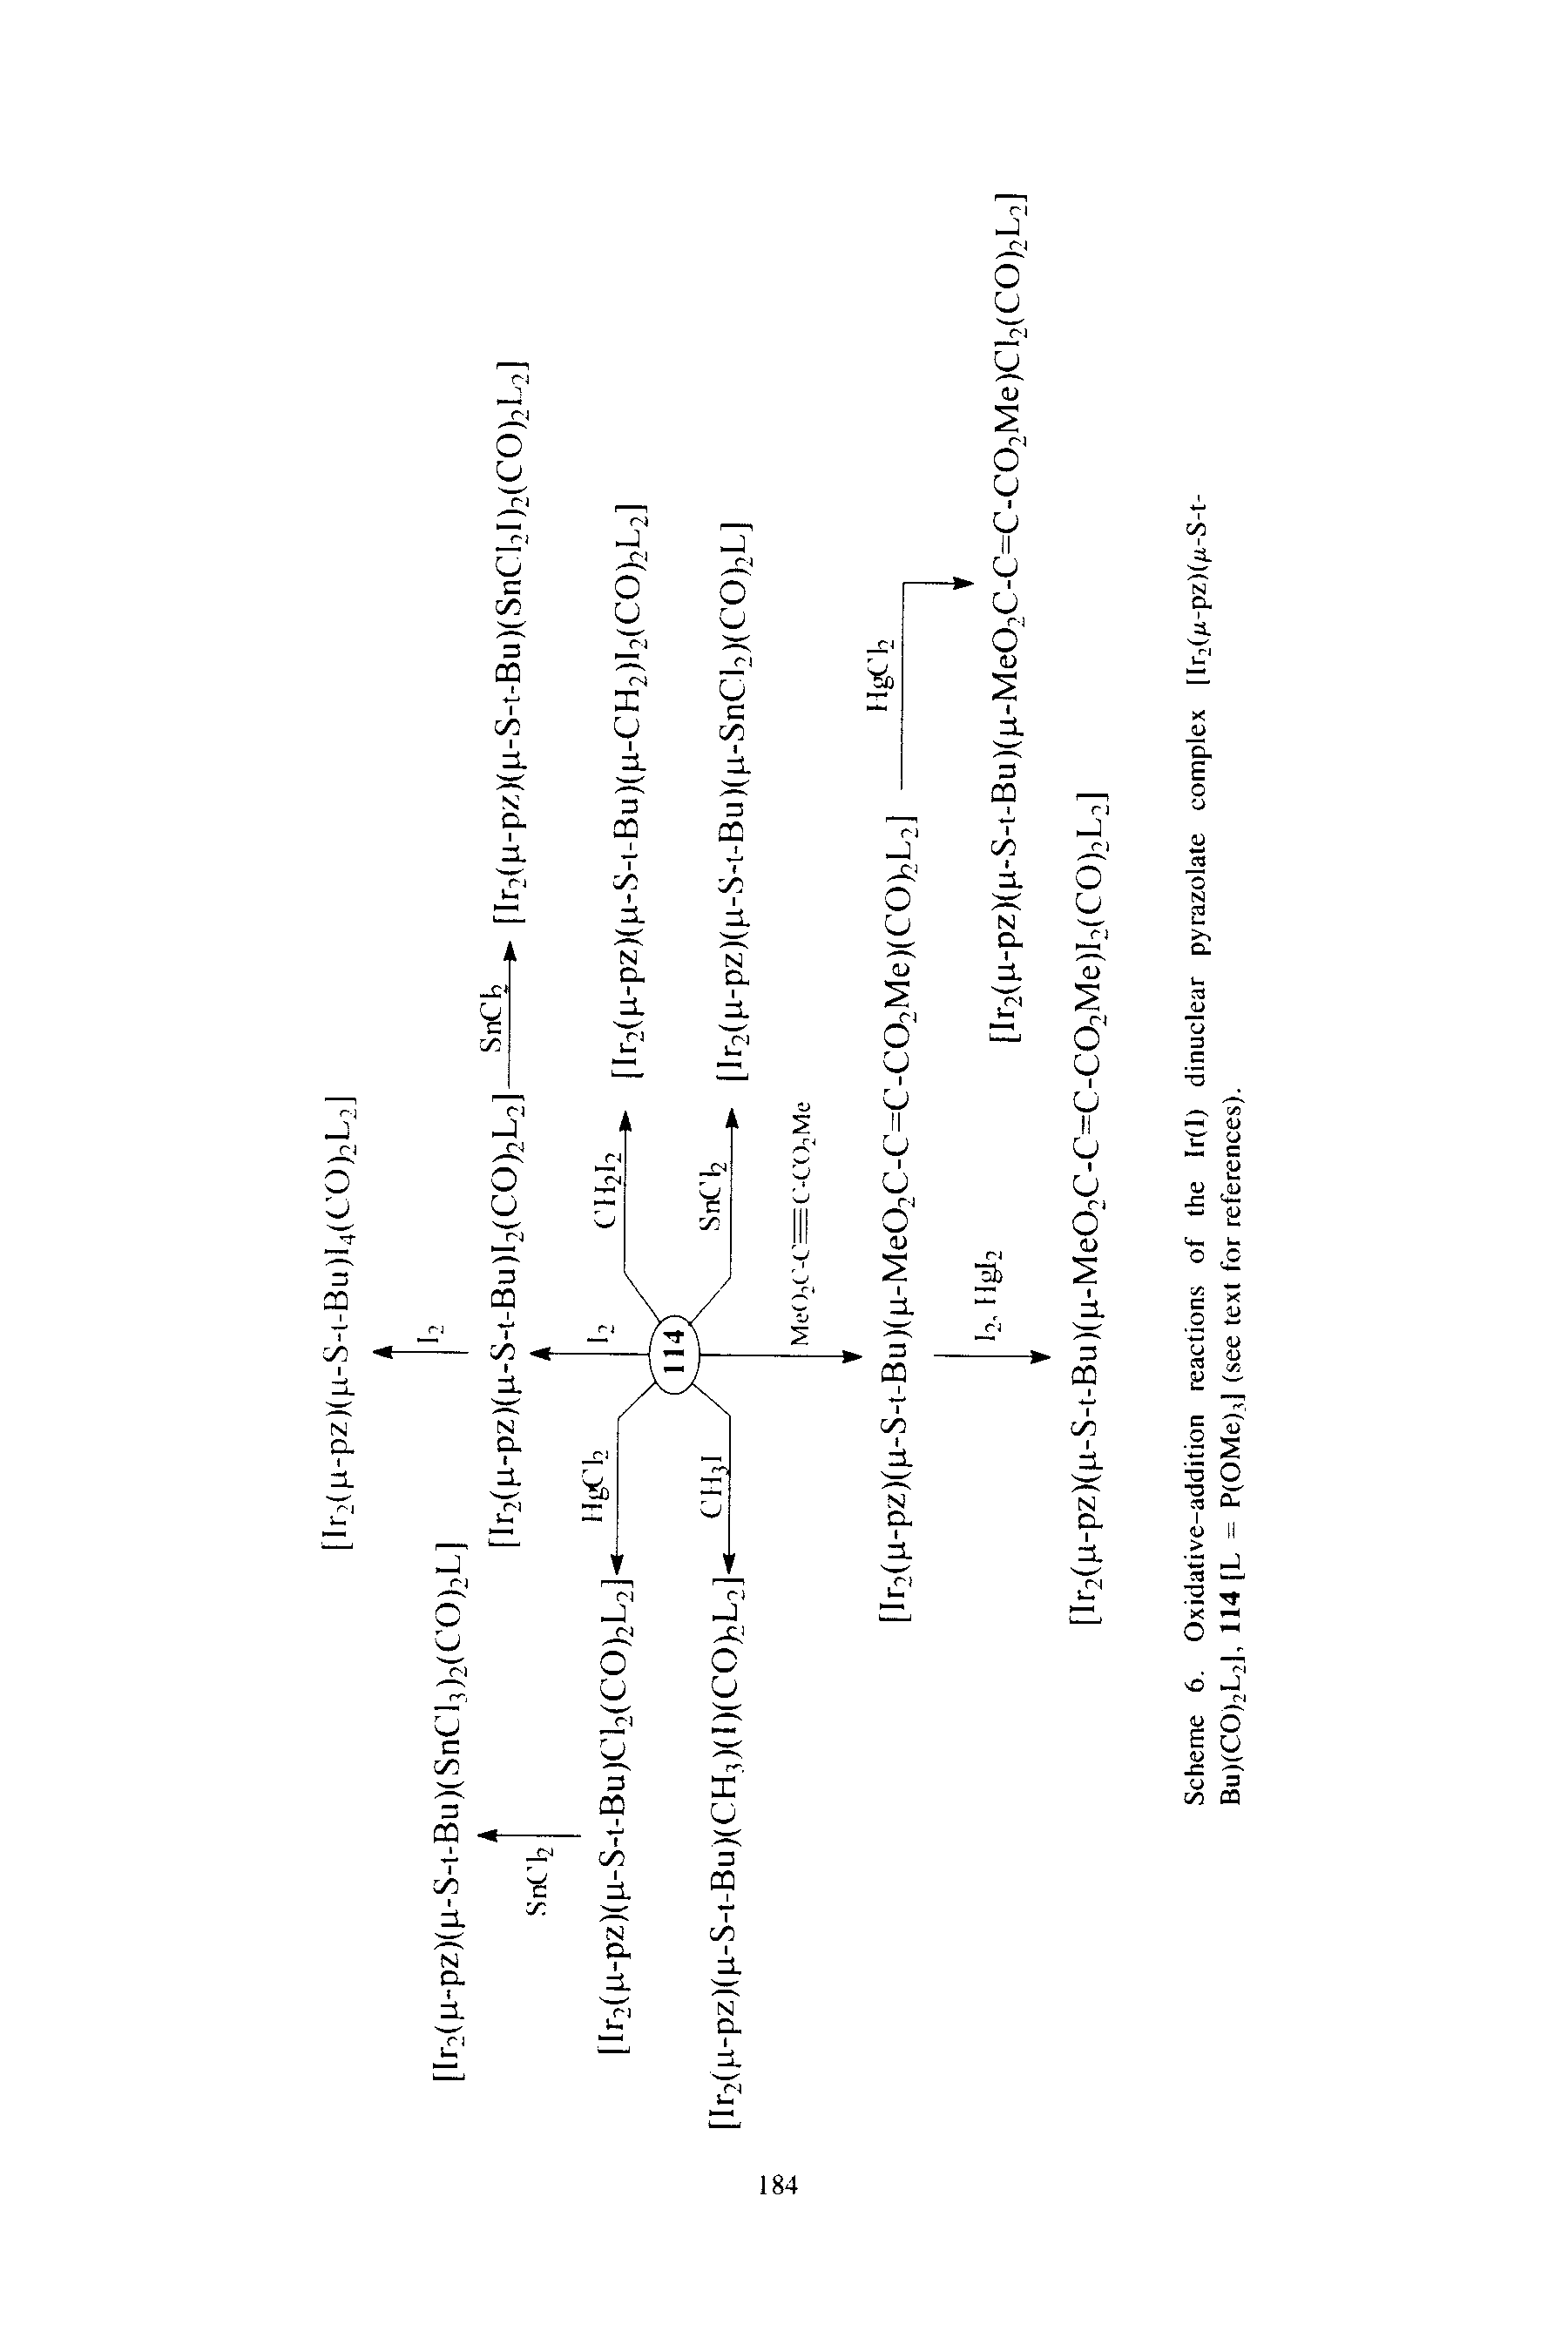 Scheme 6. Oxidative-addition reactions of the Ir(l) dinuclear pyrazolate complex [Ir2(p-pz)(/r-S-t-Bu)(CO)2L2), 114 [L = P(OMe),] (see text for references).